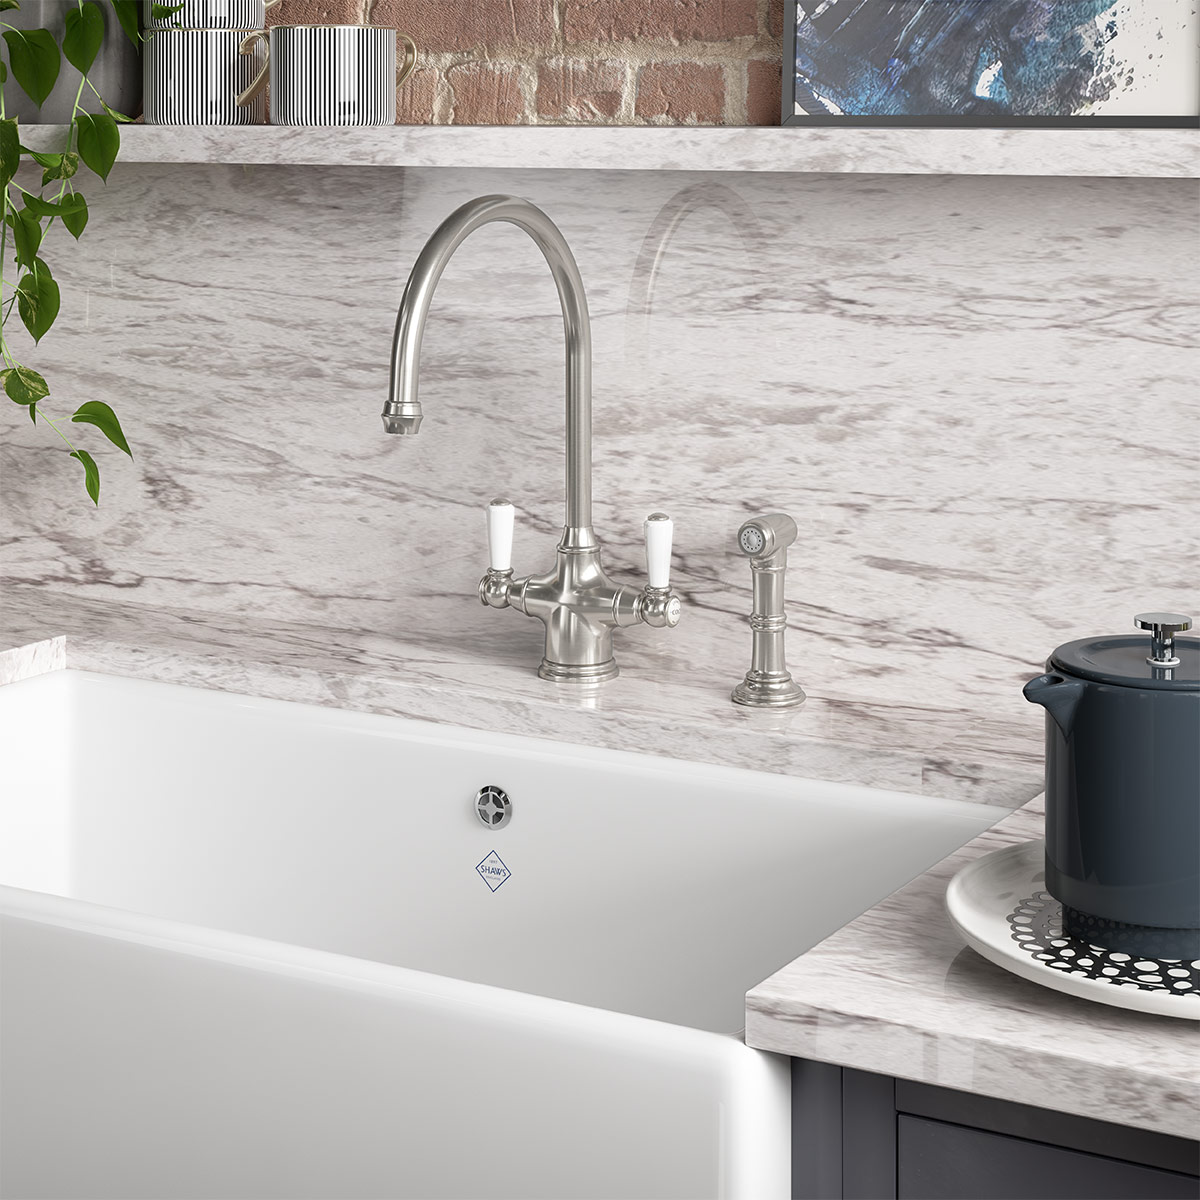 Shaws by Perrin & Rowe Ribble kitchen mixer with spray rinse in Pewter. Phoenician style monobloc kitchen tap AUSH.4360. Distributed in Australia by Luxe by Design, Brisbane.